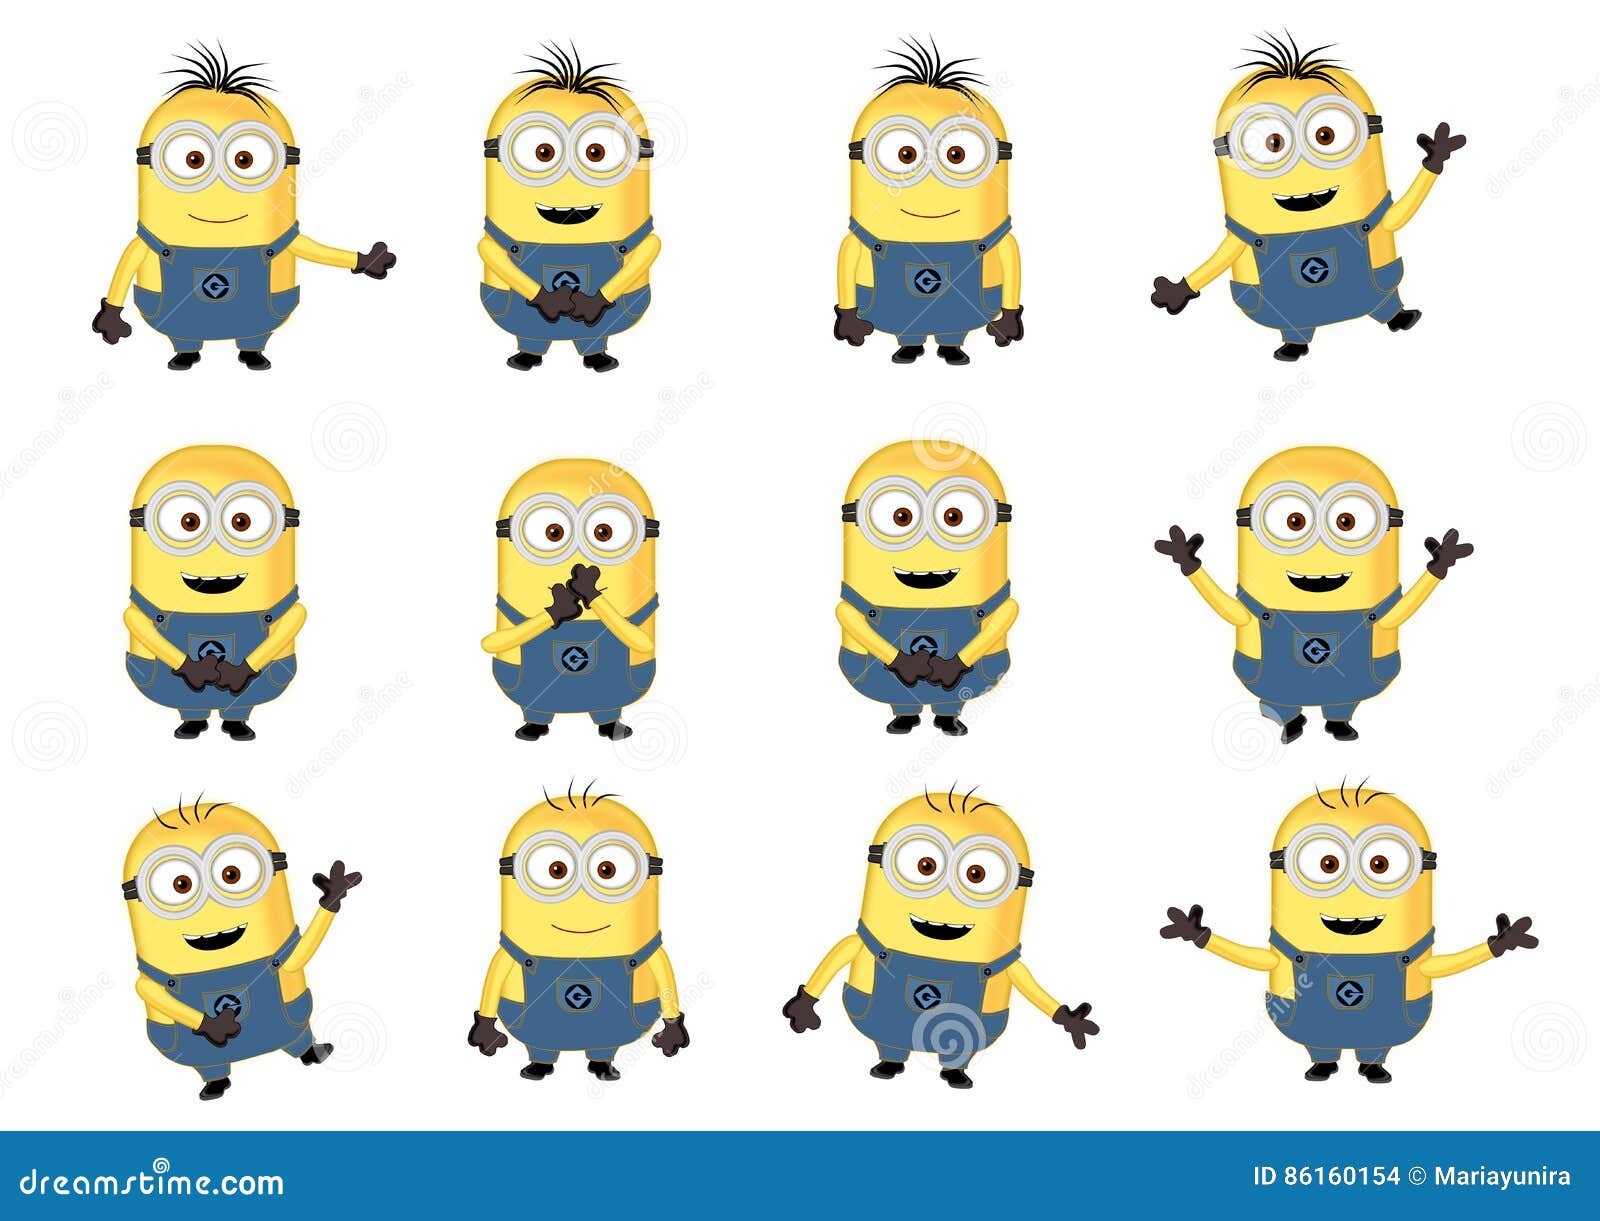 The minions character set collection illustrations concept.